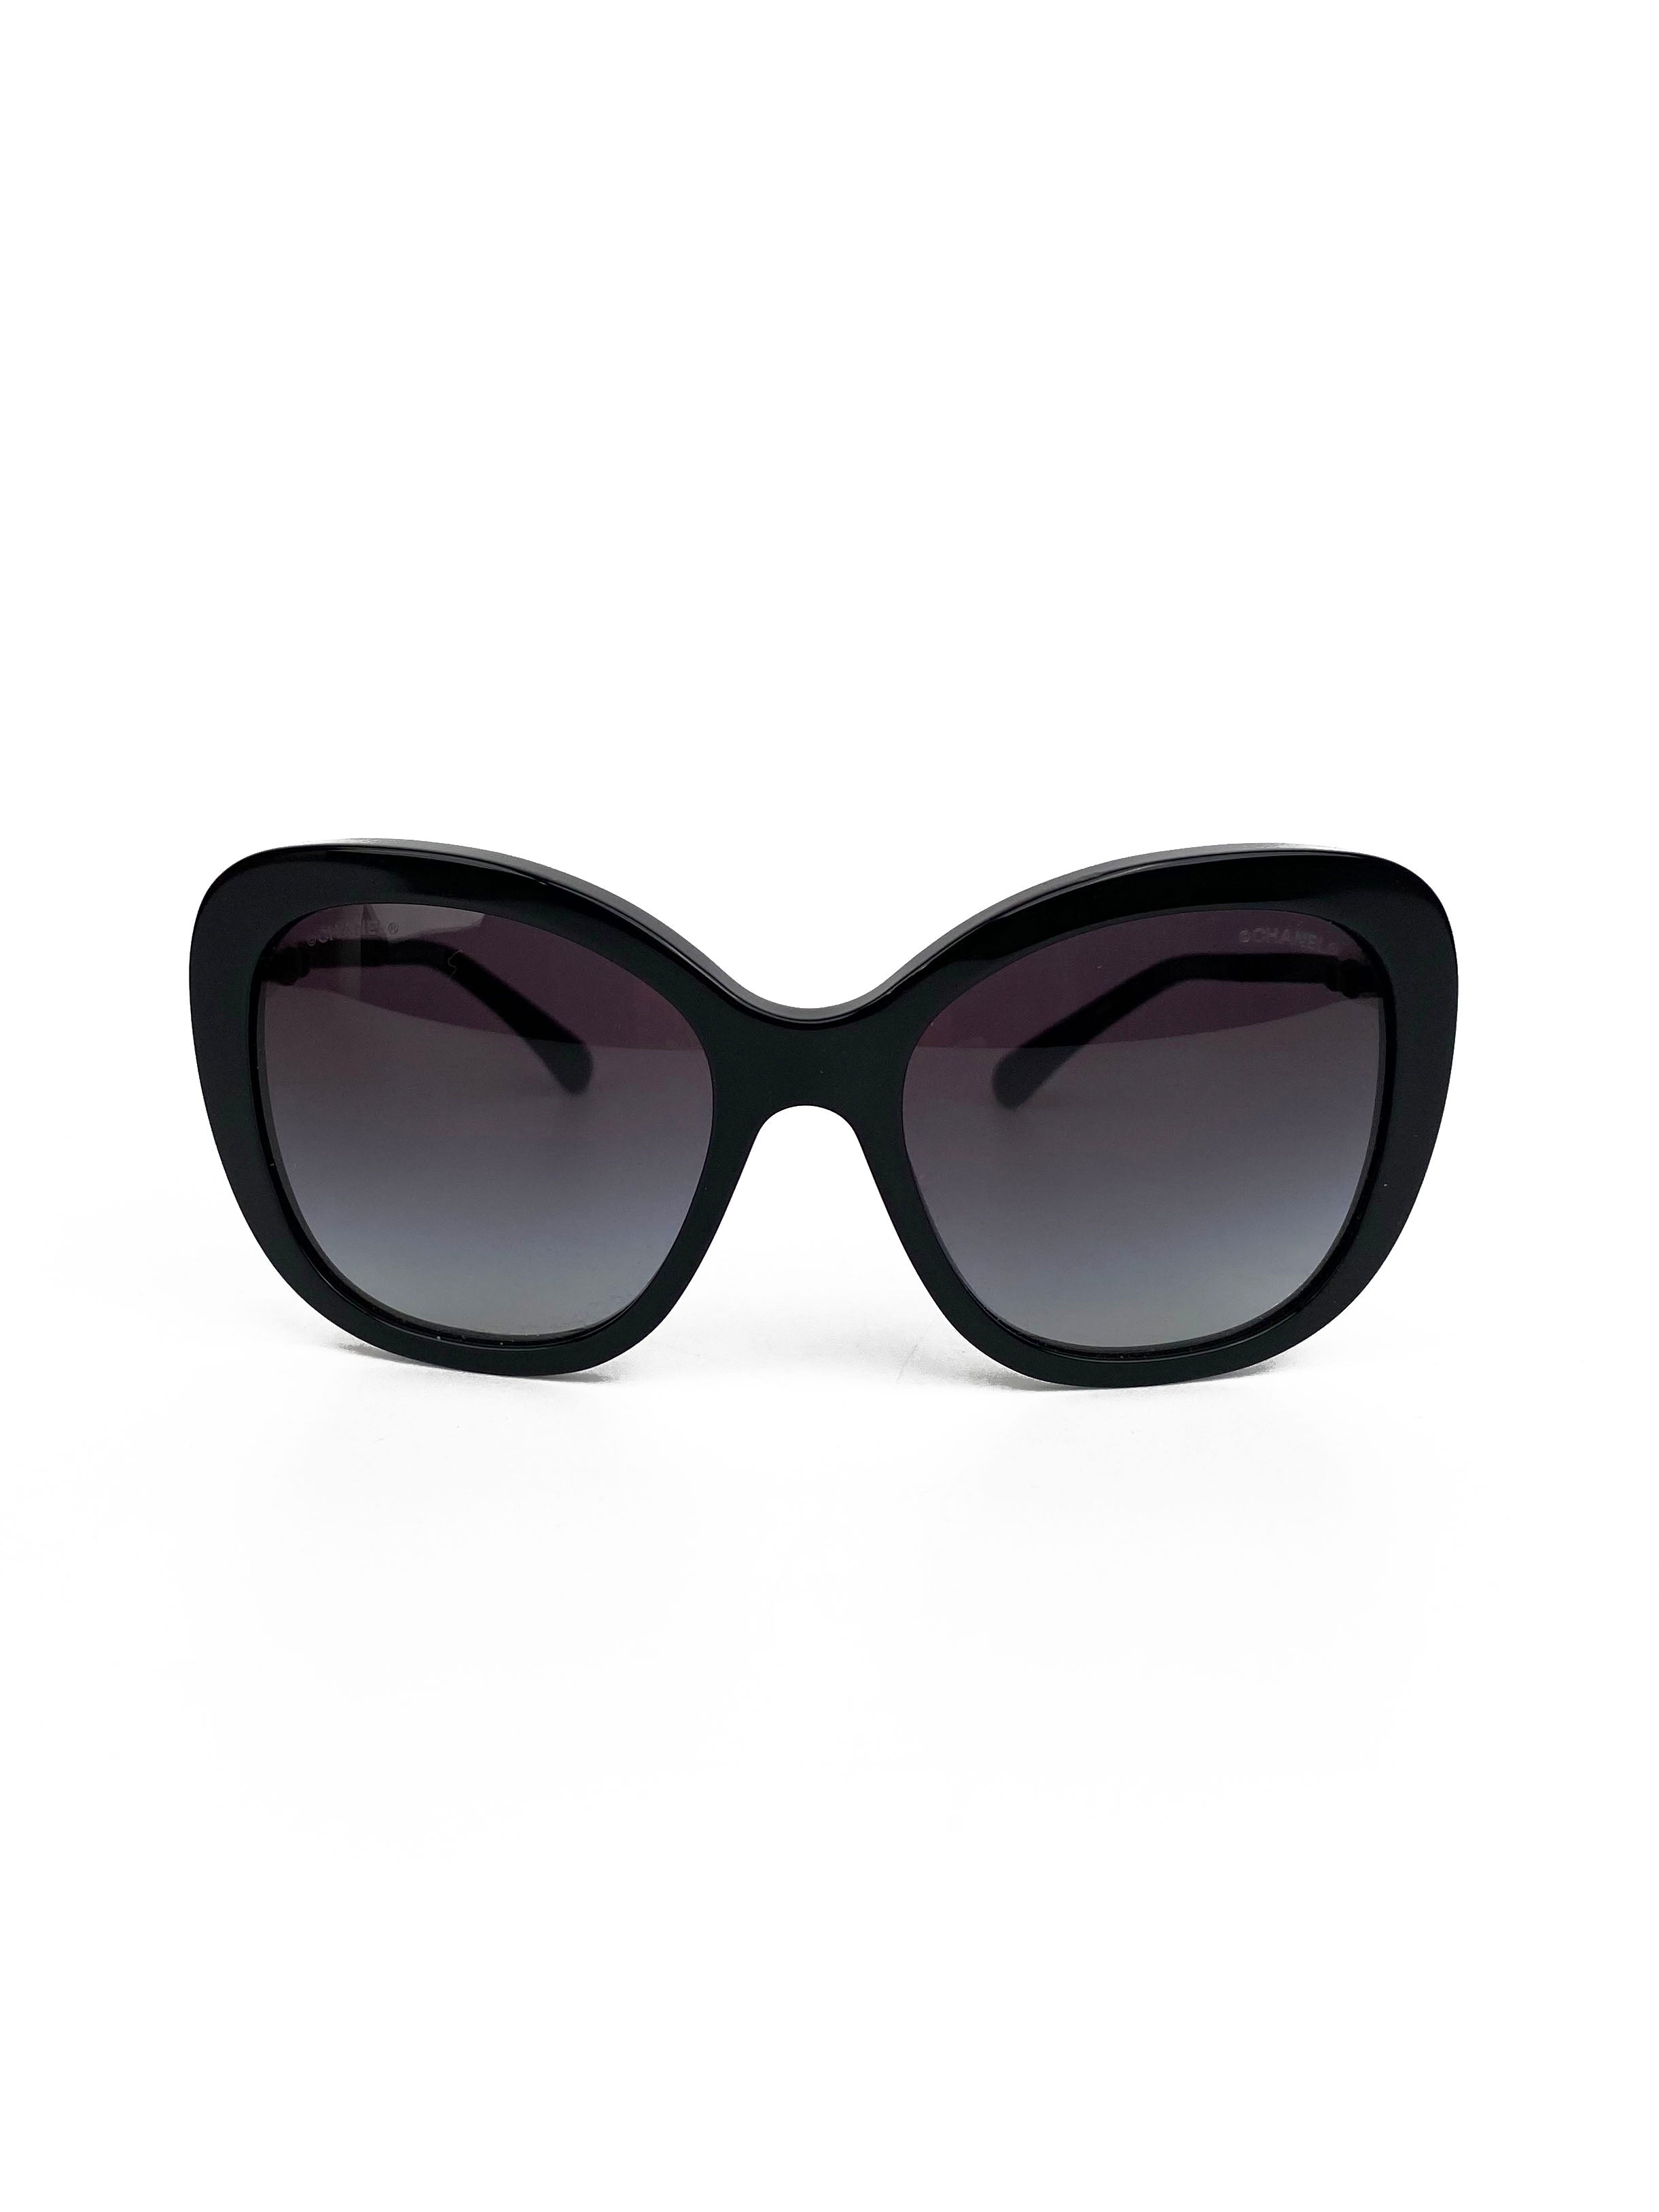 Chanel Black Butterfly Sunglasses with Imitation Pearls 5339H